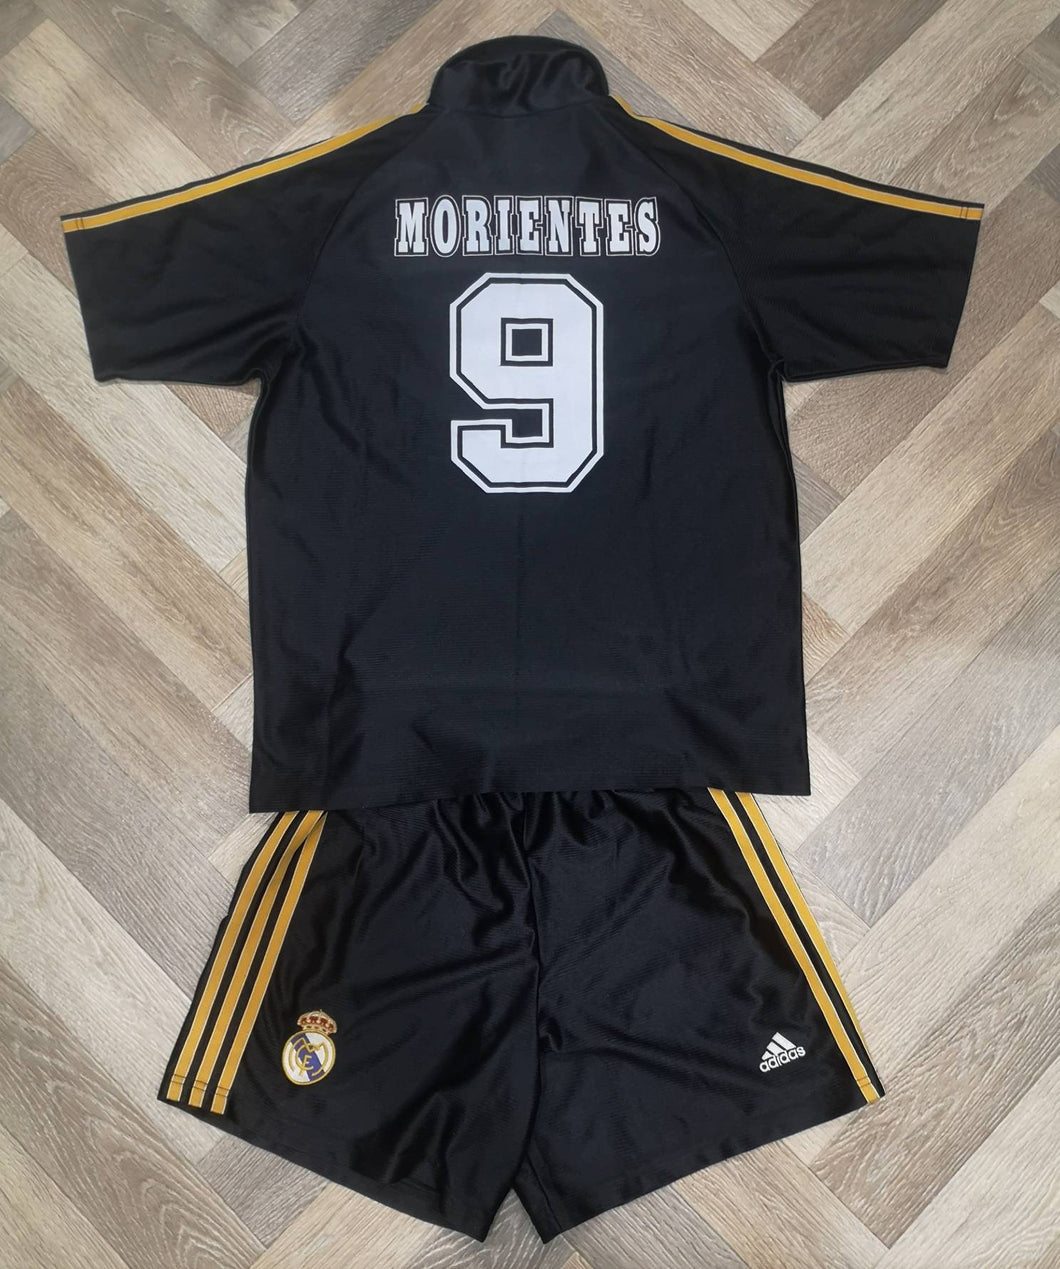 Jersey Morientes #9 Real Madrid 1998-99 Away Vintage